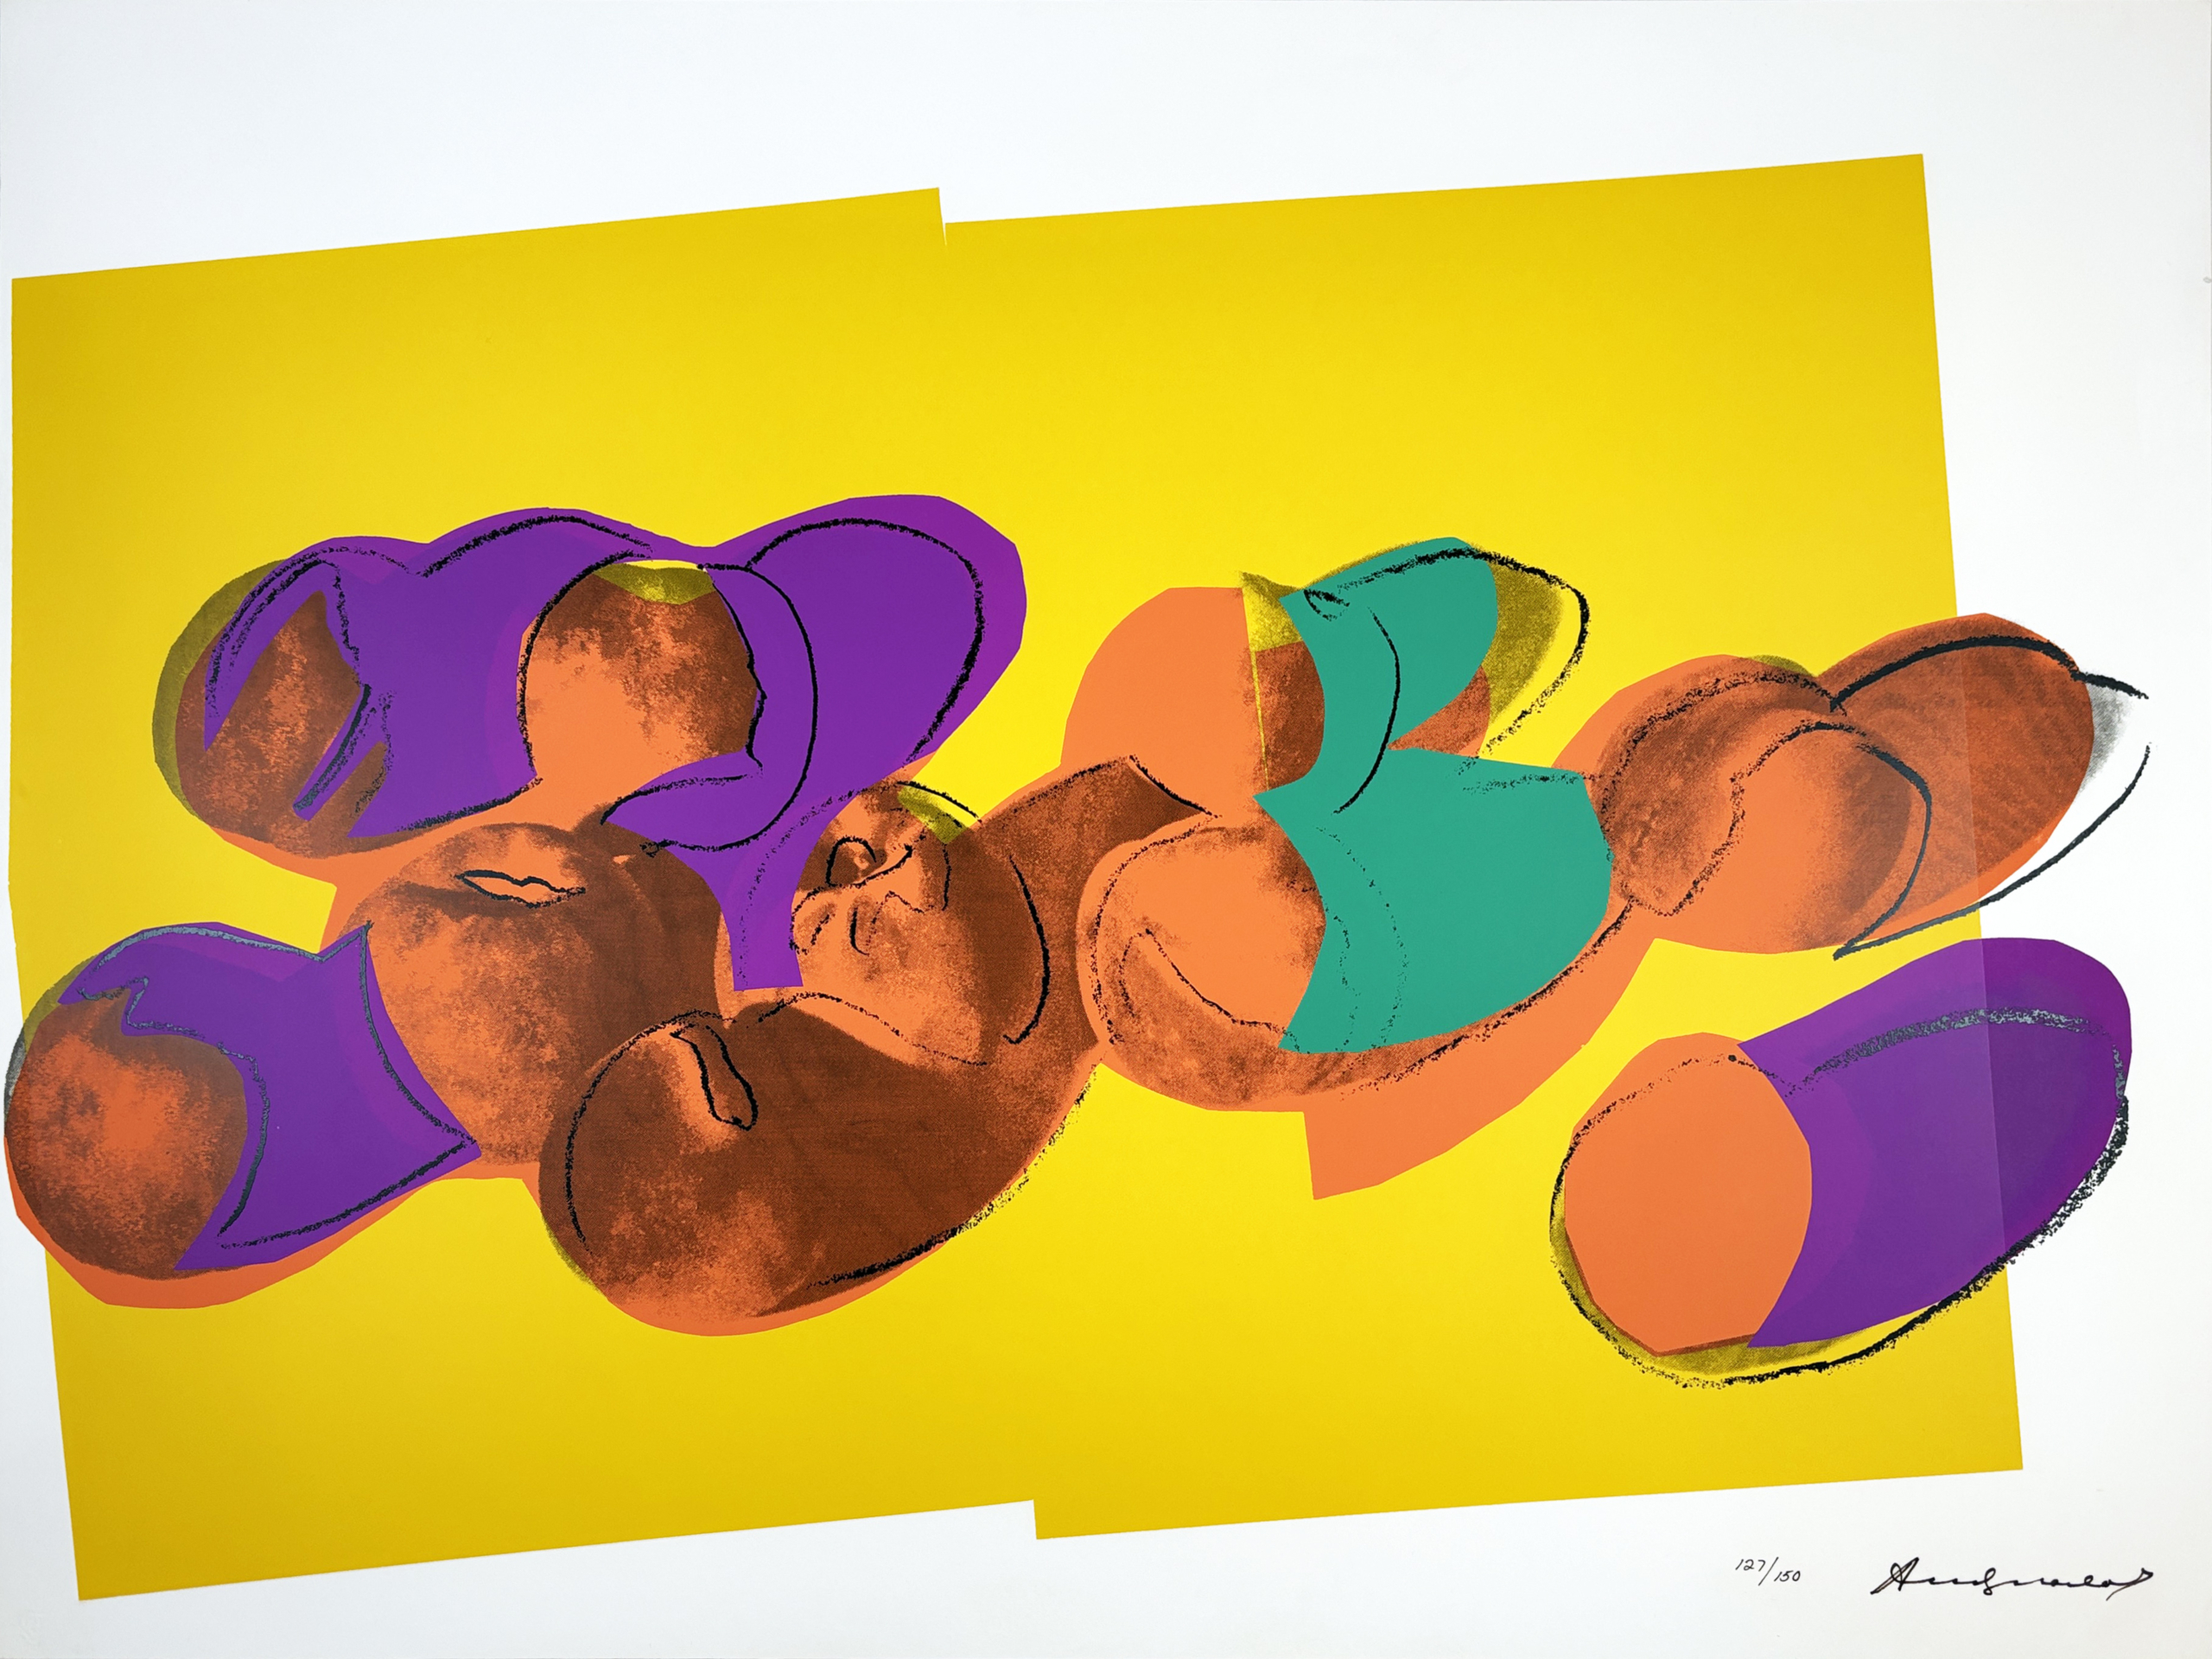 Andy Warhol | Space Fruit | Peaches, II.202 | 1979